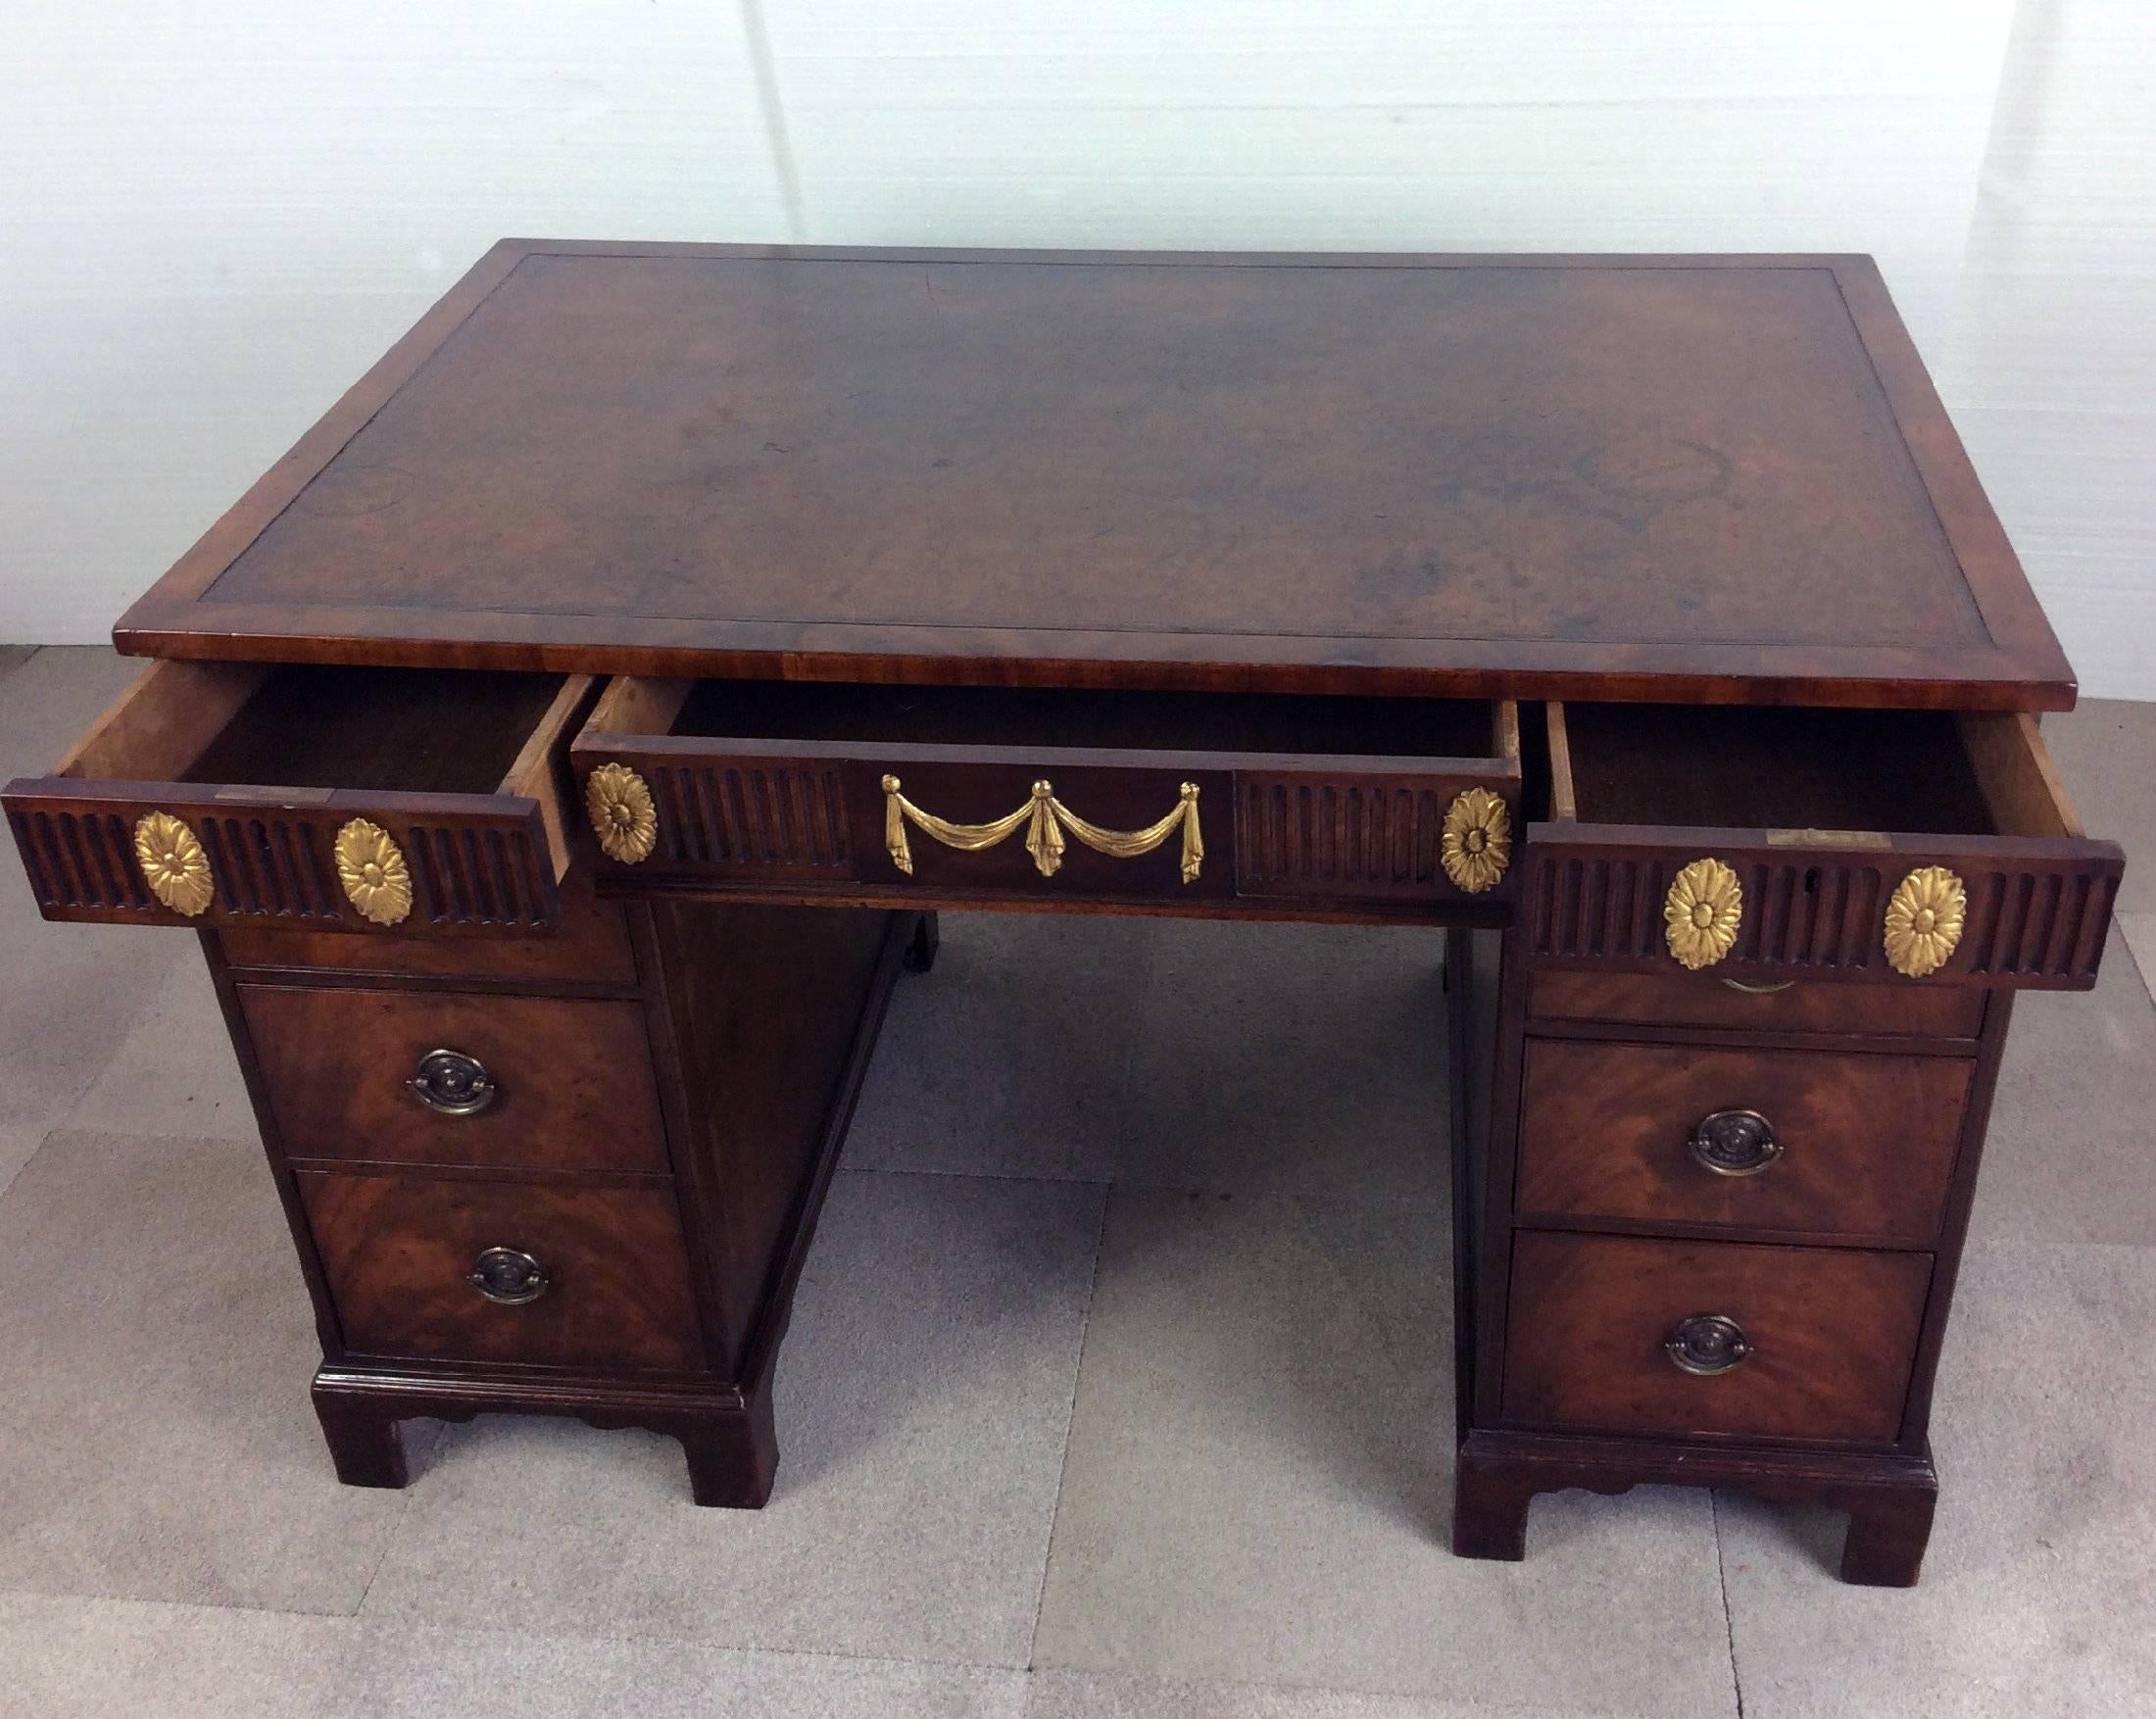 19th Century Mahogany and Parcel-Gilt Neoclassical Pedestal Desk In Excellent Condition In London, west Sussex